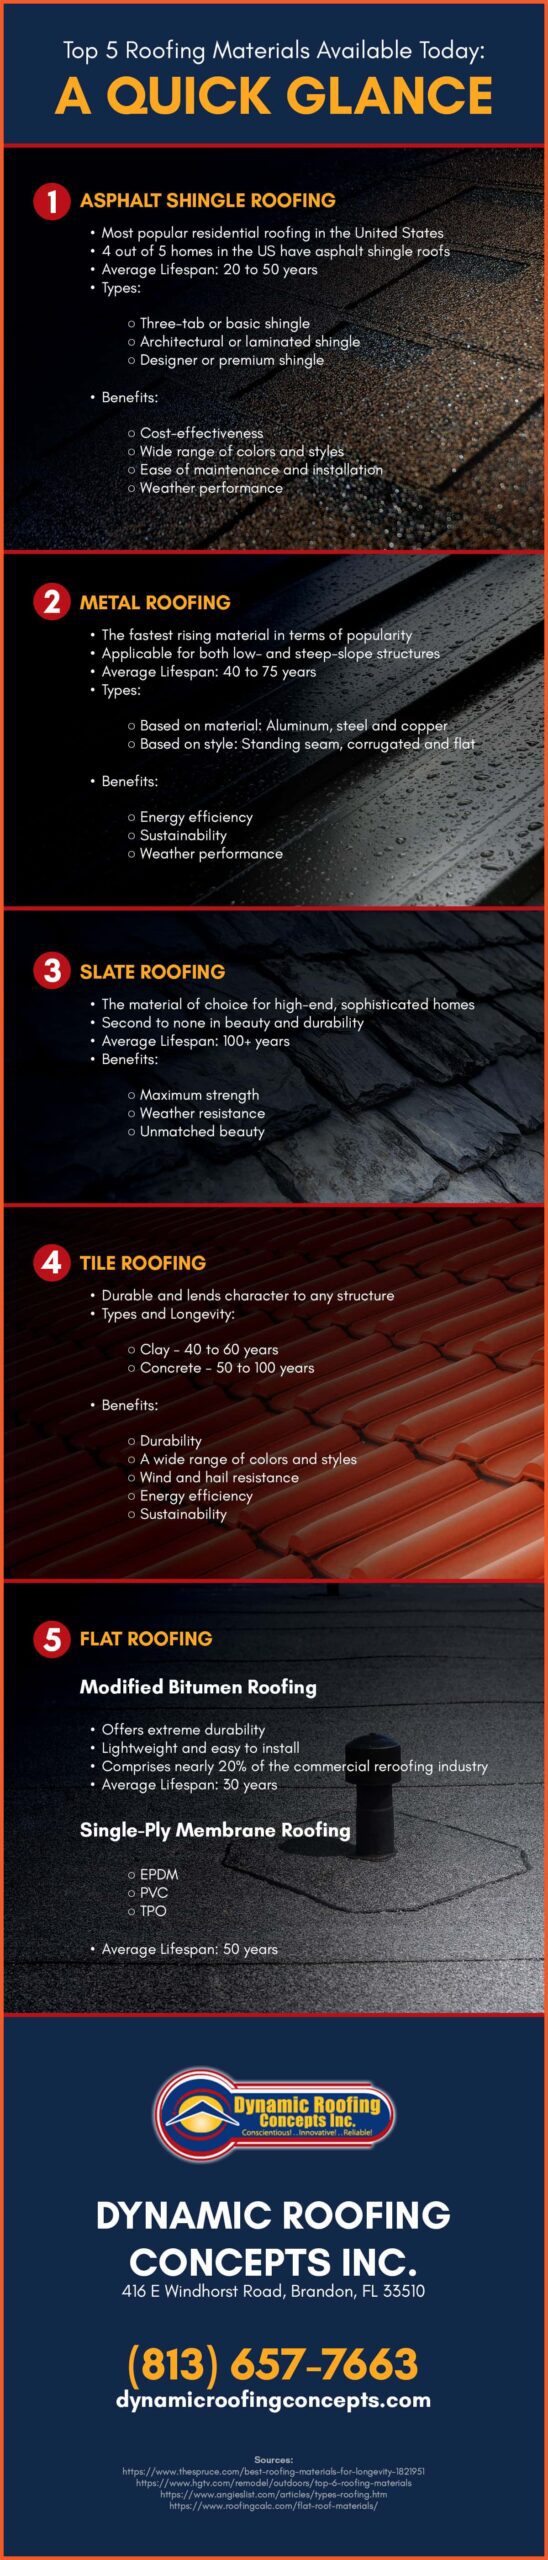 [INFOGRAPHIC] Top 5 Roofing Materials Available Today A Quick Glance-min